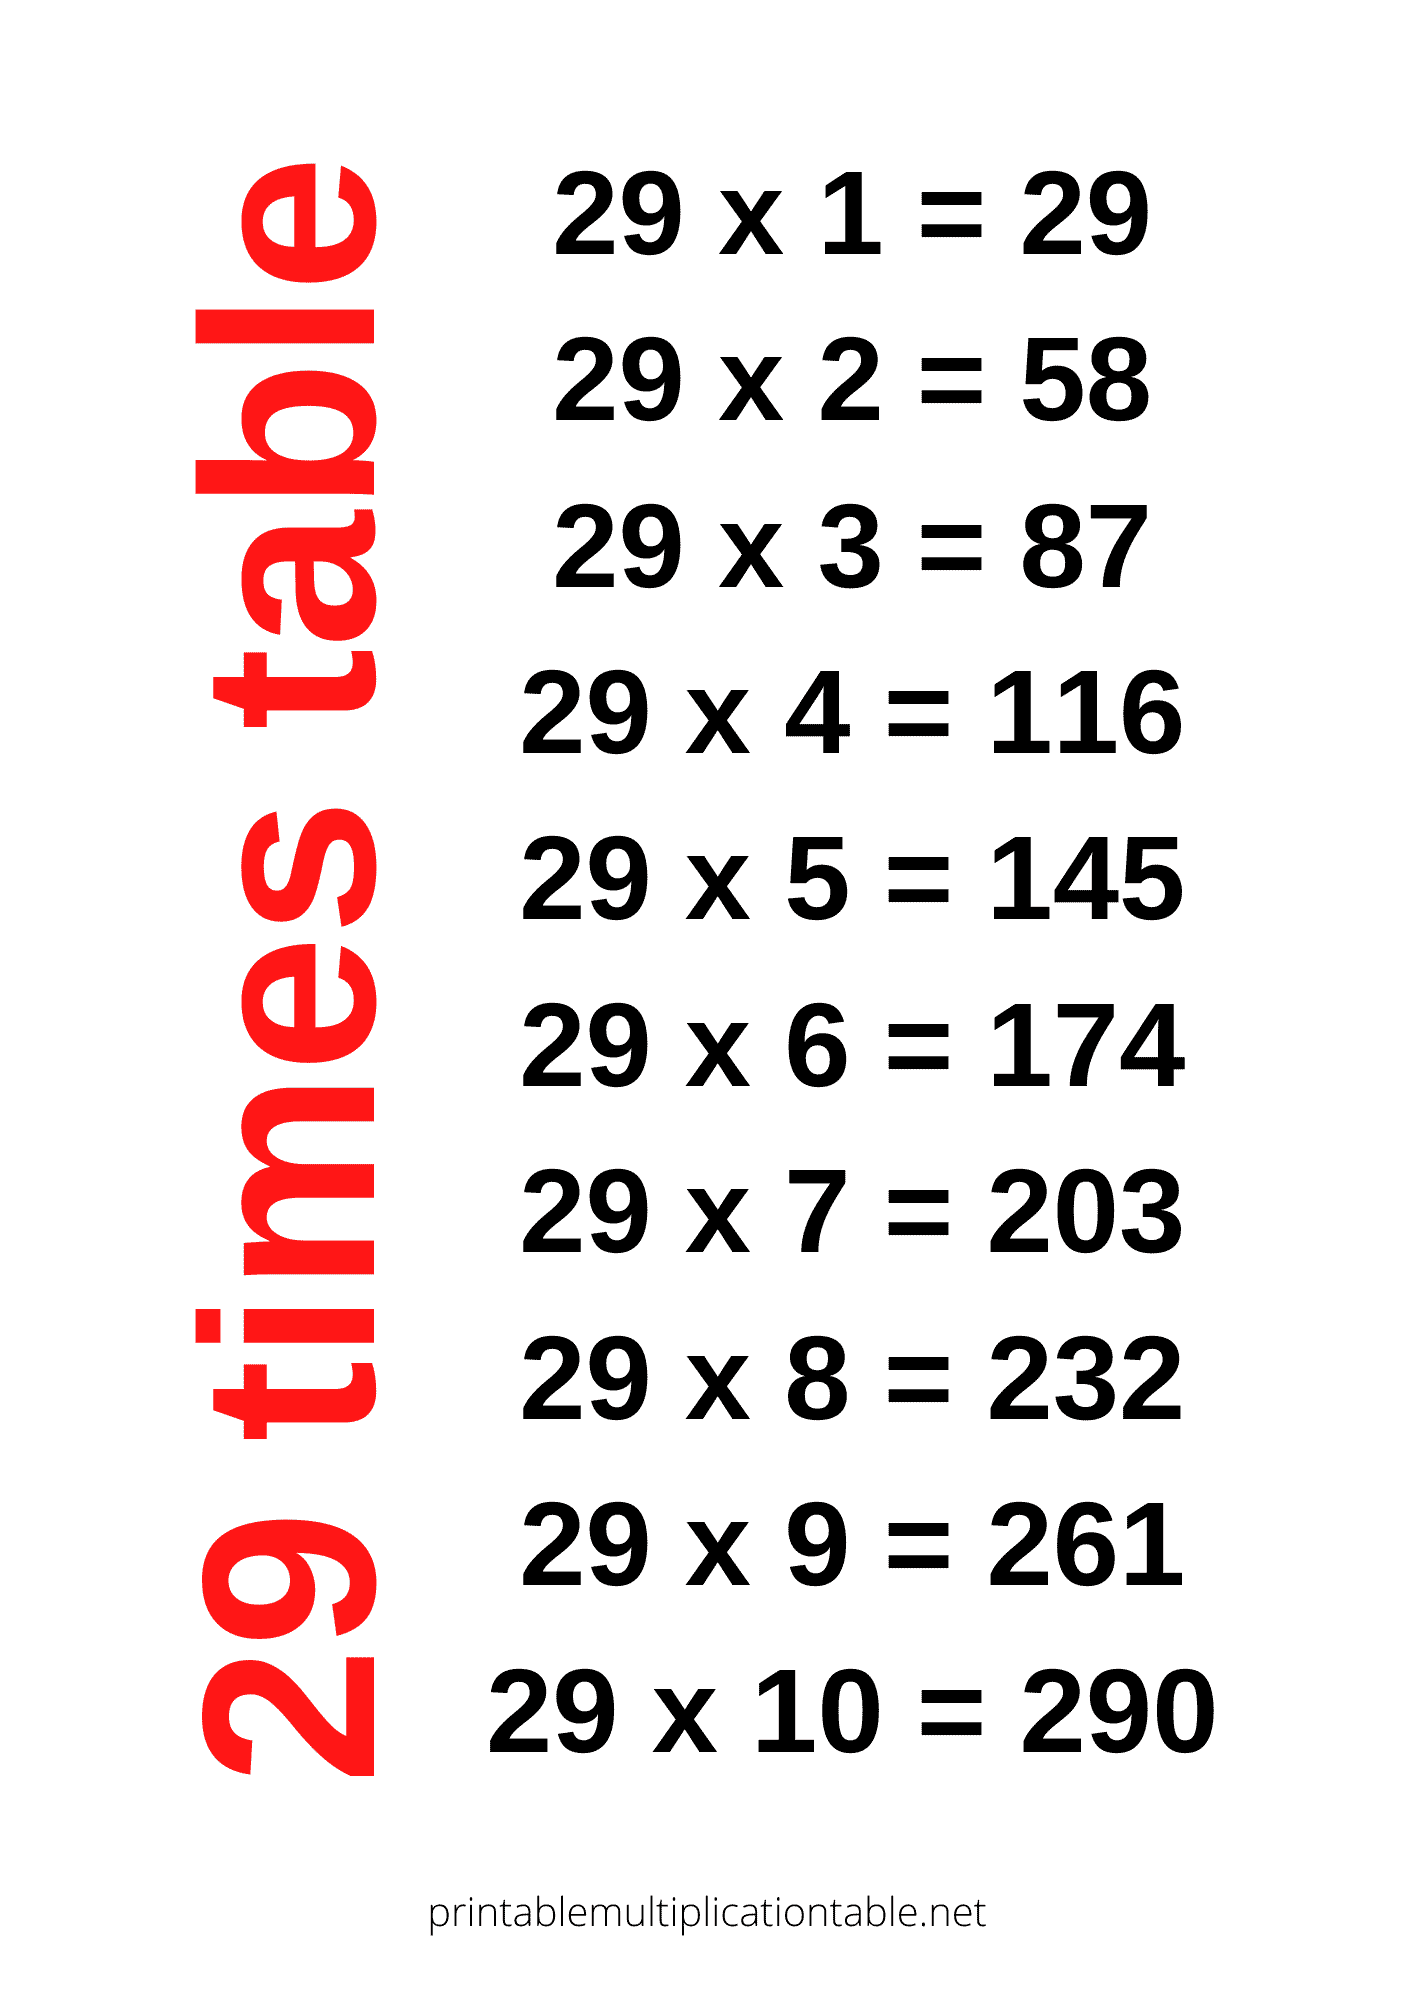 29 times table chart